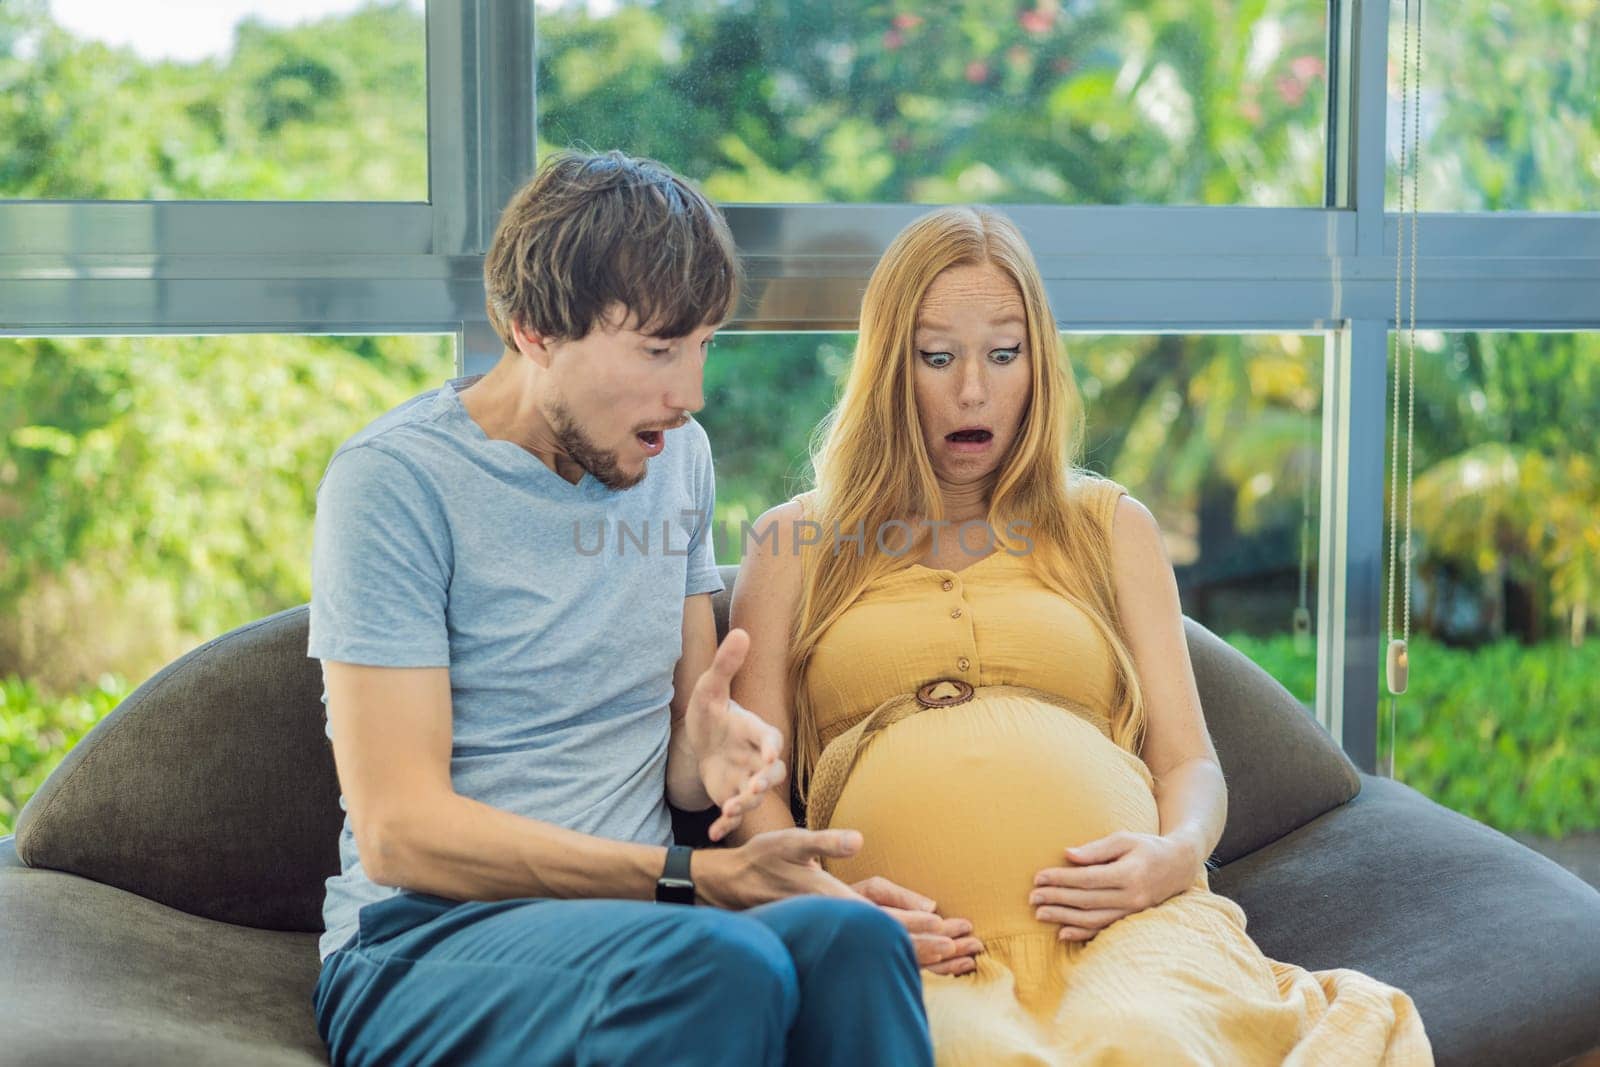 In a pivotal moment, the pregnant woman and father navigate the onset of contractions together, sharing the intensity and anticipation as they embark on the journey of welcoming their baby by galitskaya